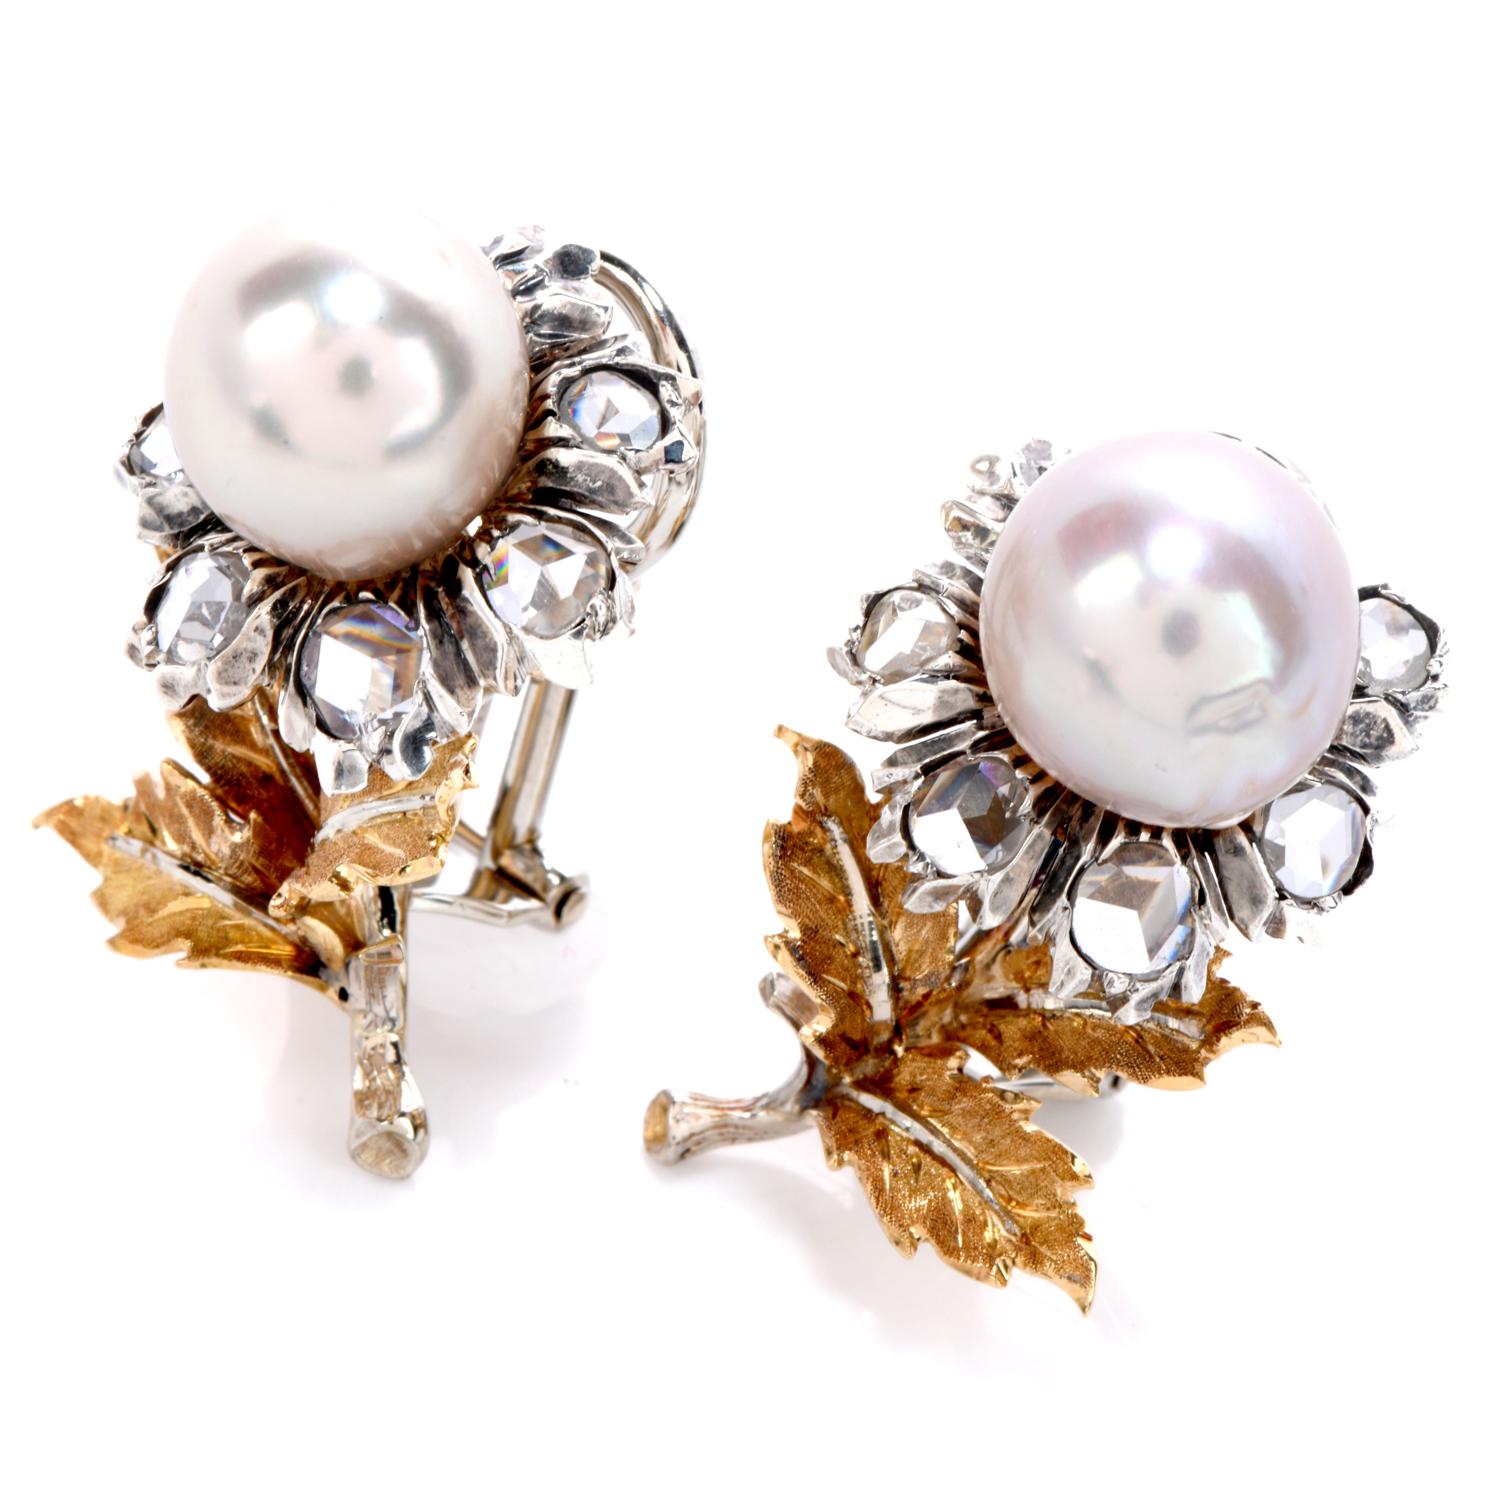 Indulge in the magnificence of these vintage Akoya Pearl and

Diamond Rose Cut Earrings with Omega Backings! 

These Buccellati earrings are beyond exquisite with 9 mm Pearl centers complimented by the currently trending style of 10 rose-cut